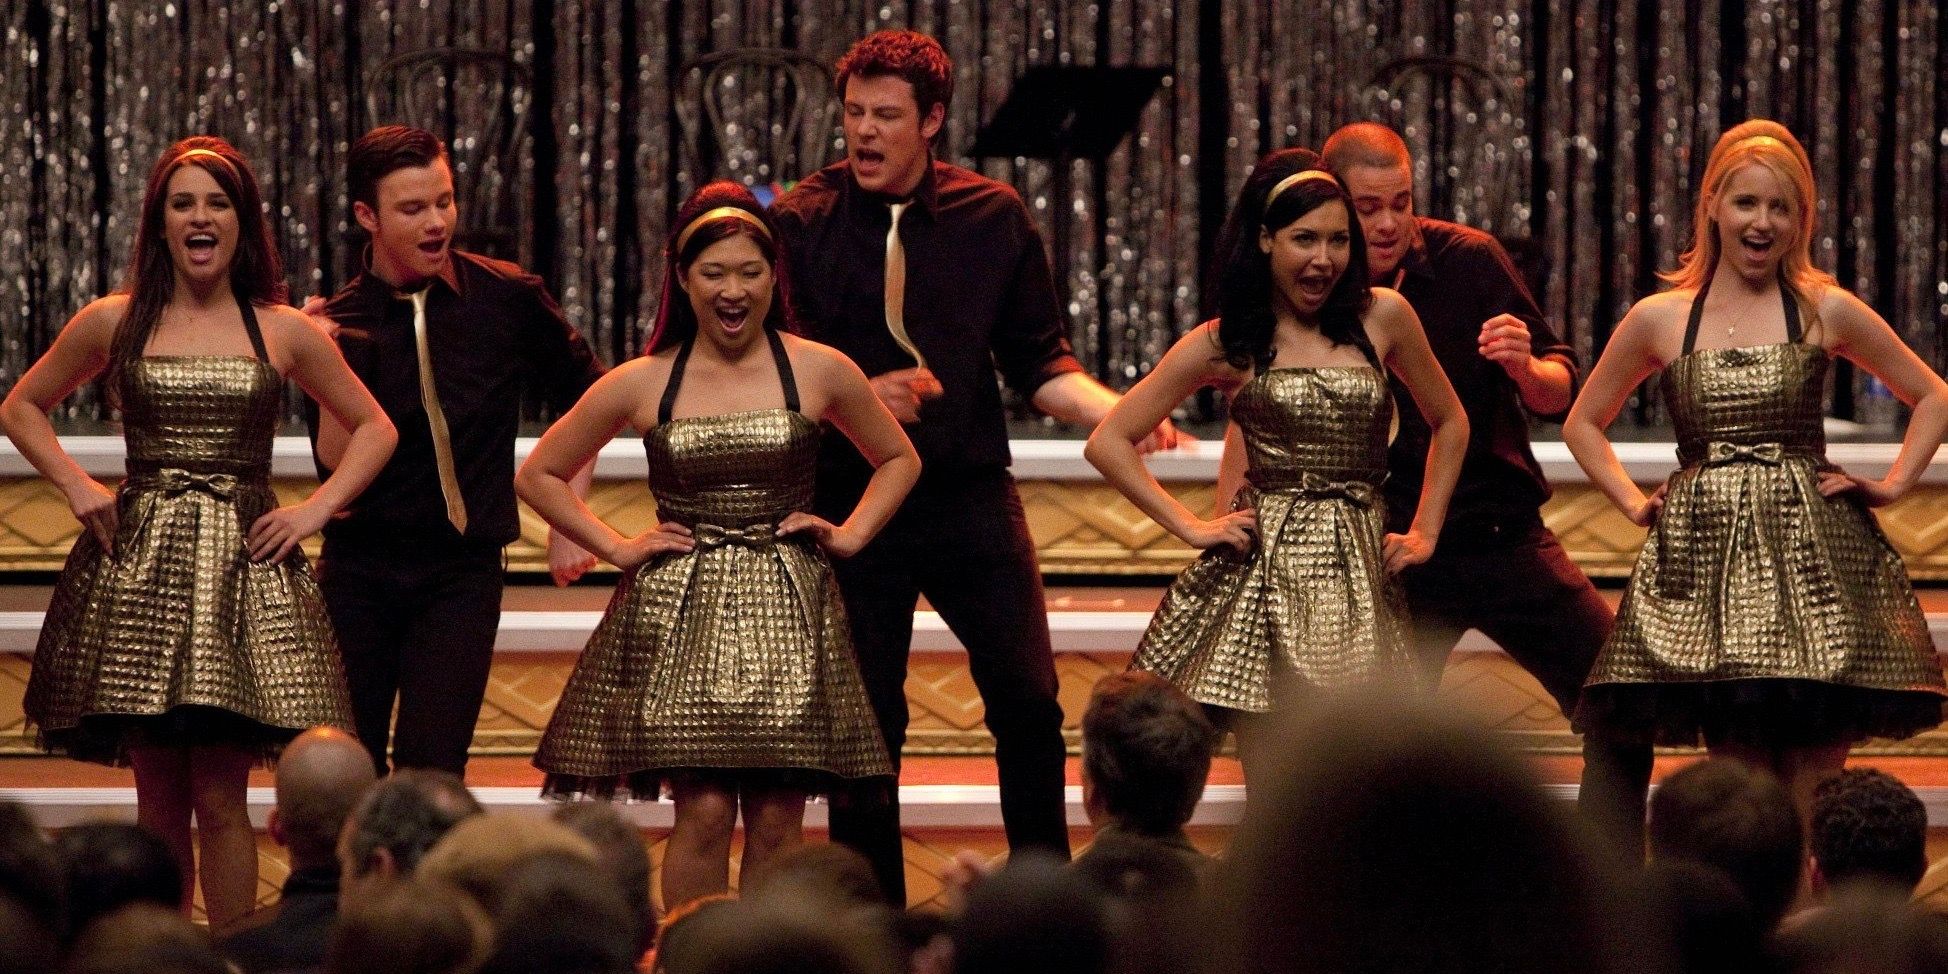 The New Directions performing on stage in Glee